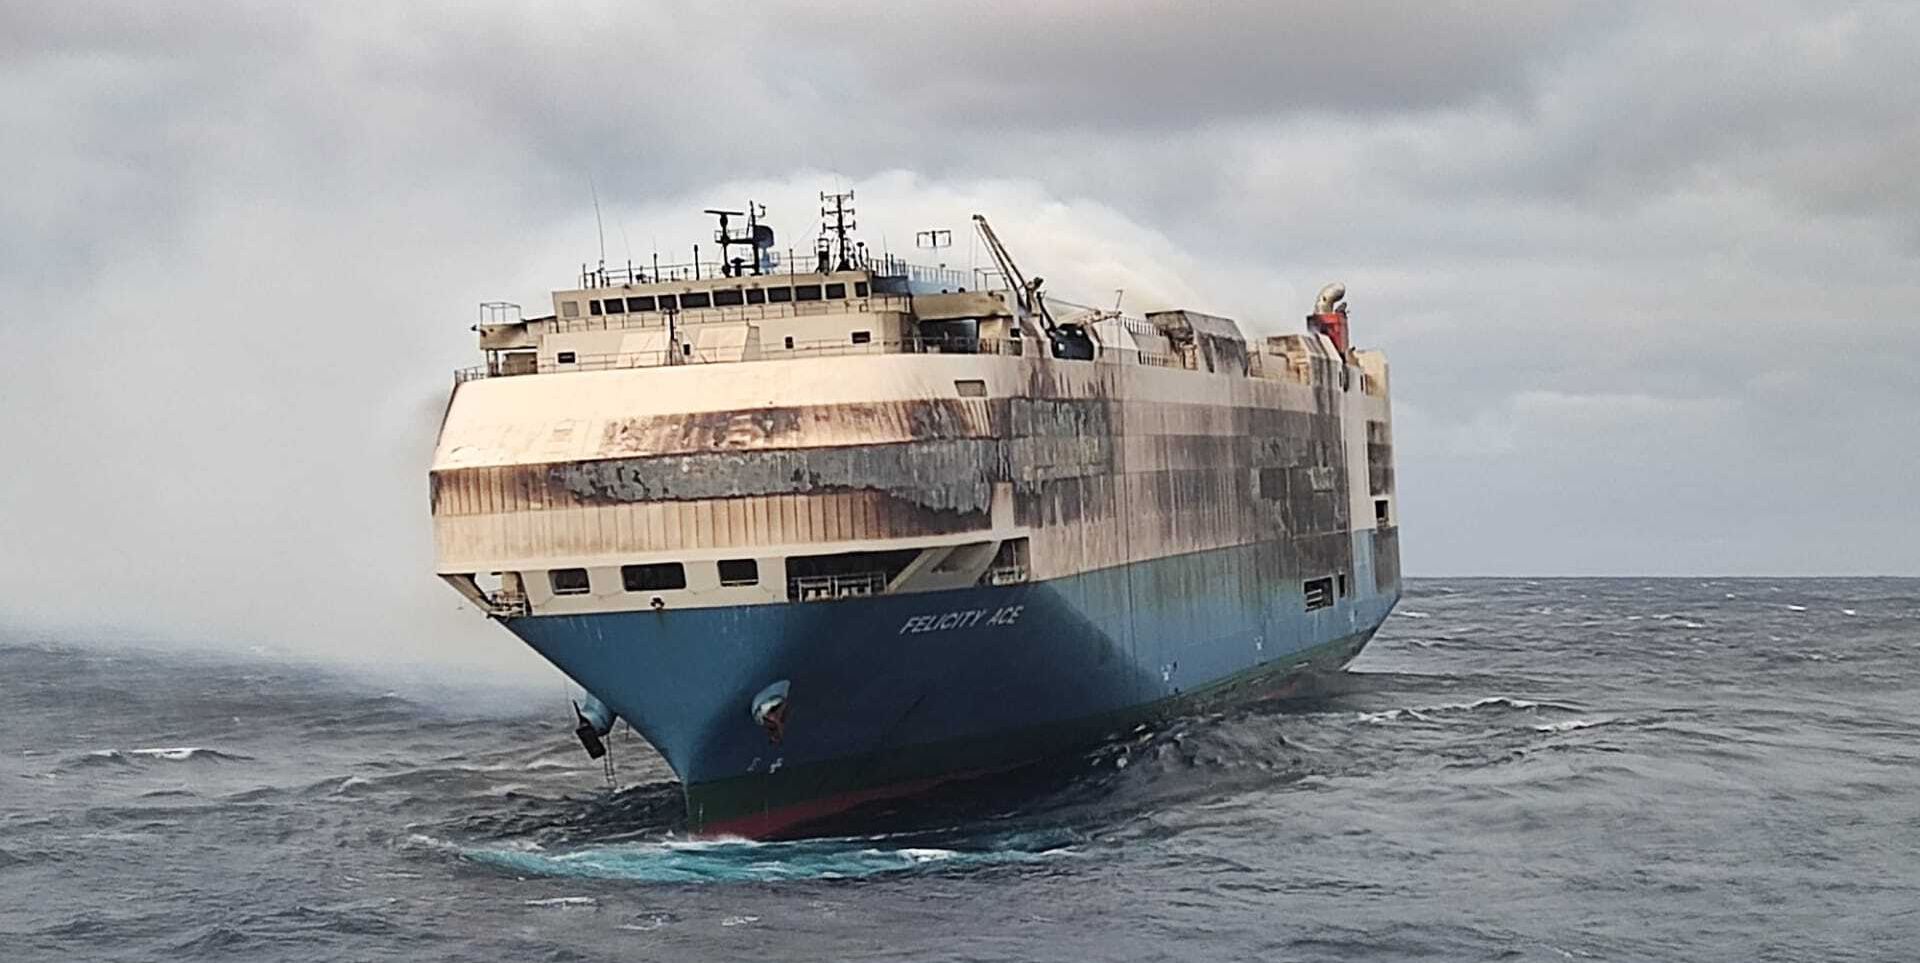 'Felicity Ace' Cargo Ship Carrying Porsches, VWs, and Lamborghini Sinks After Fire